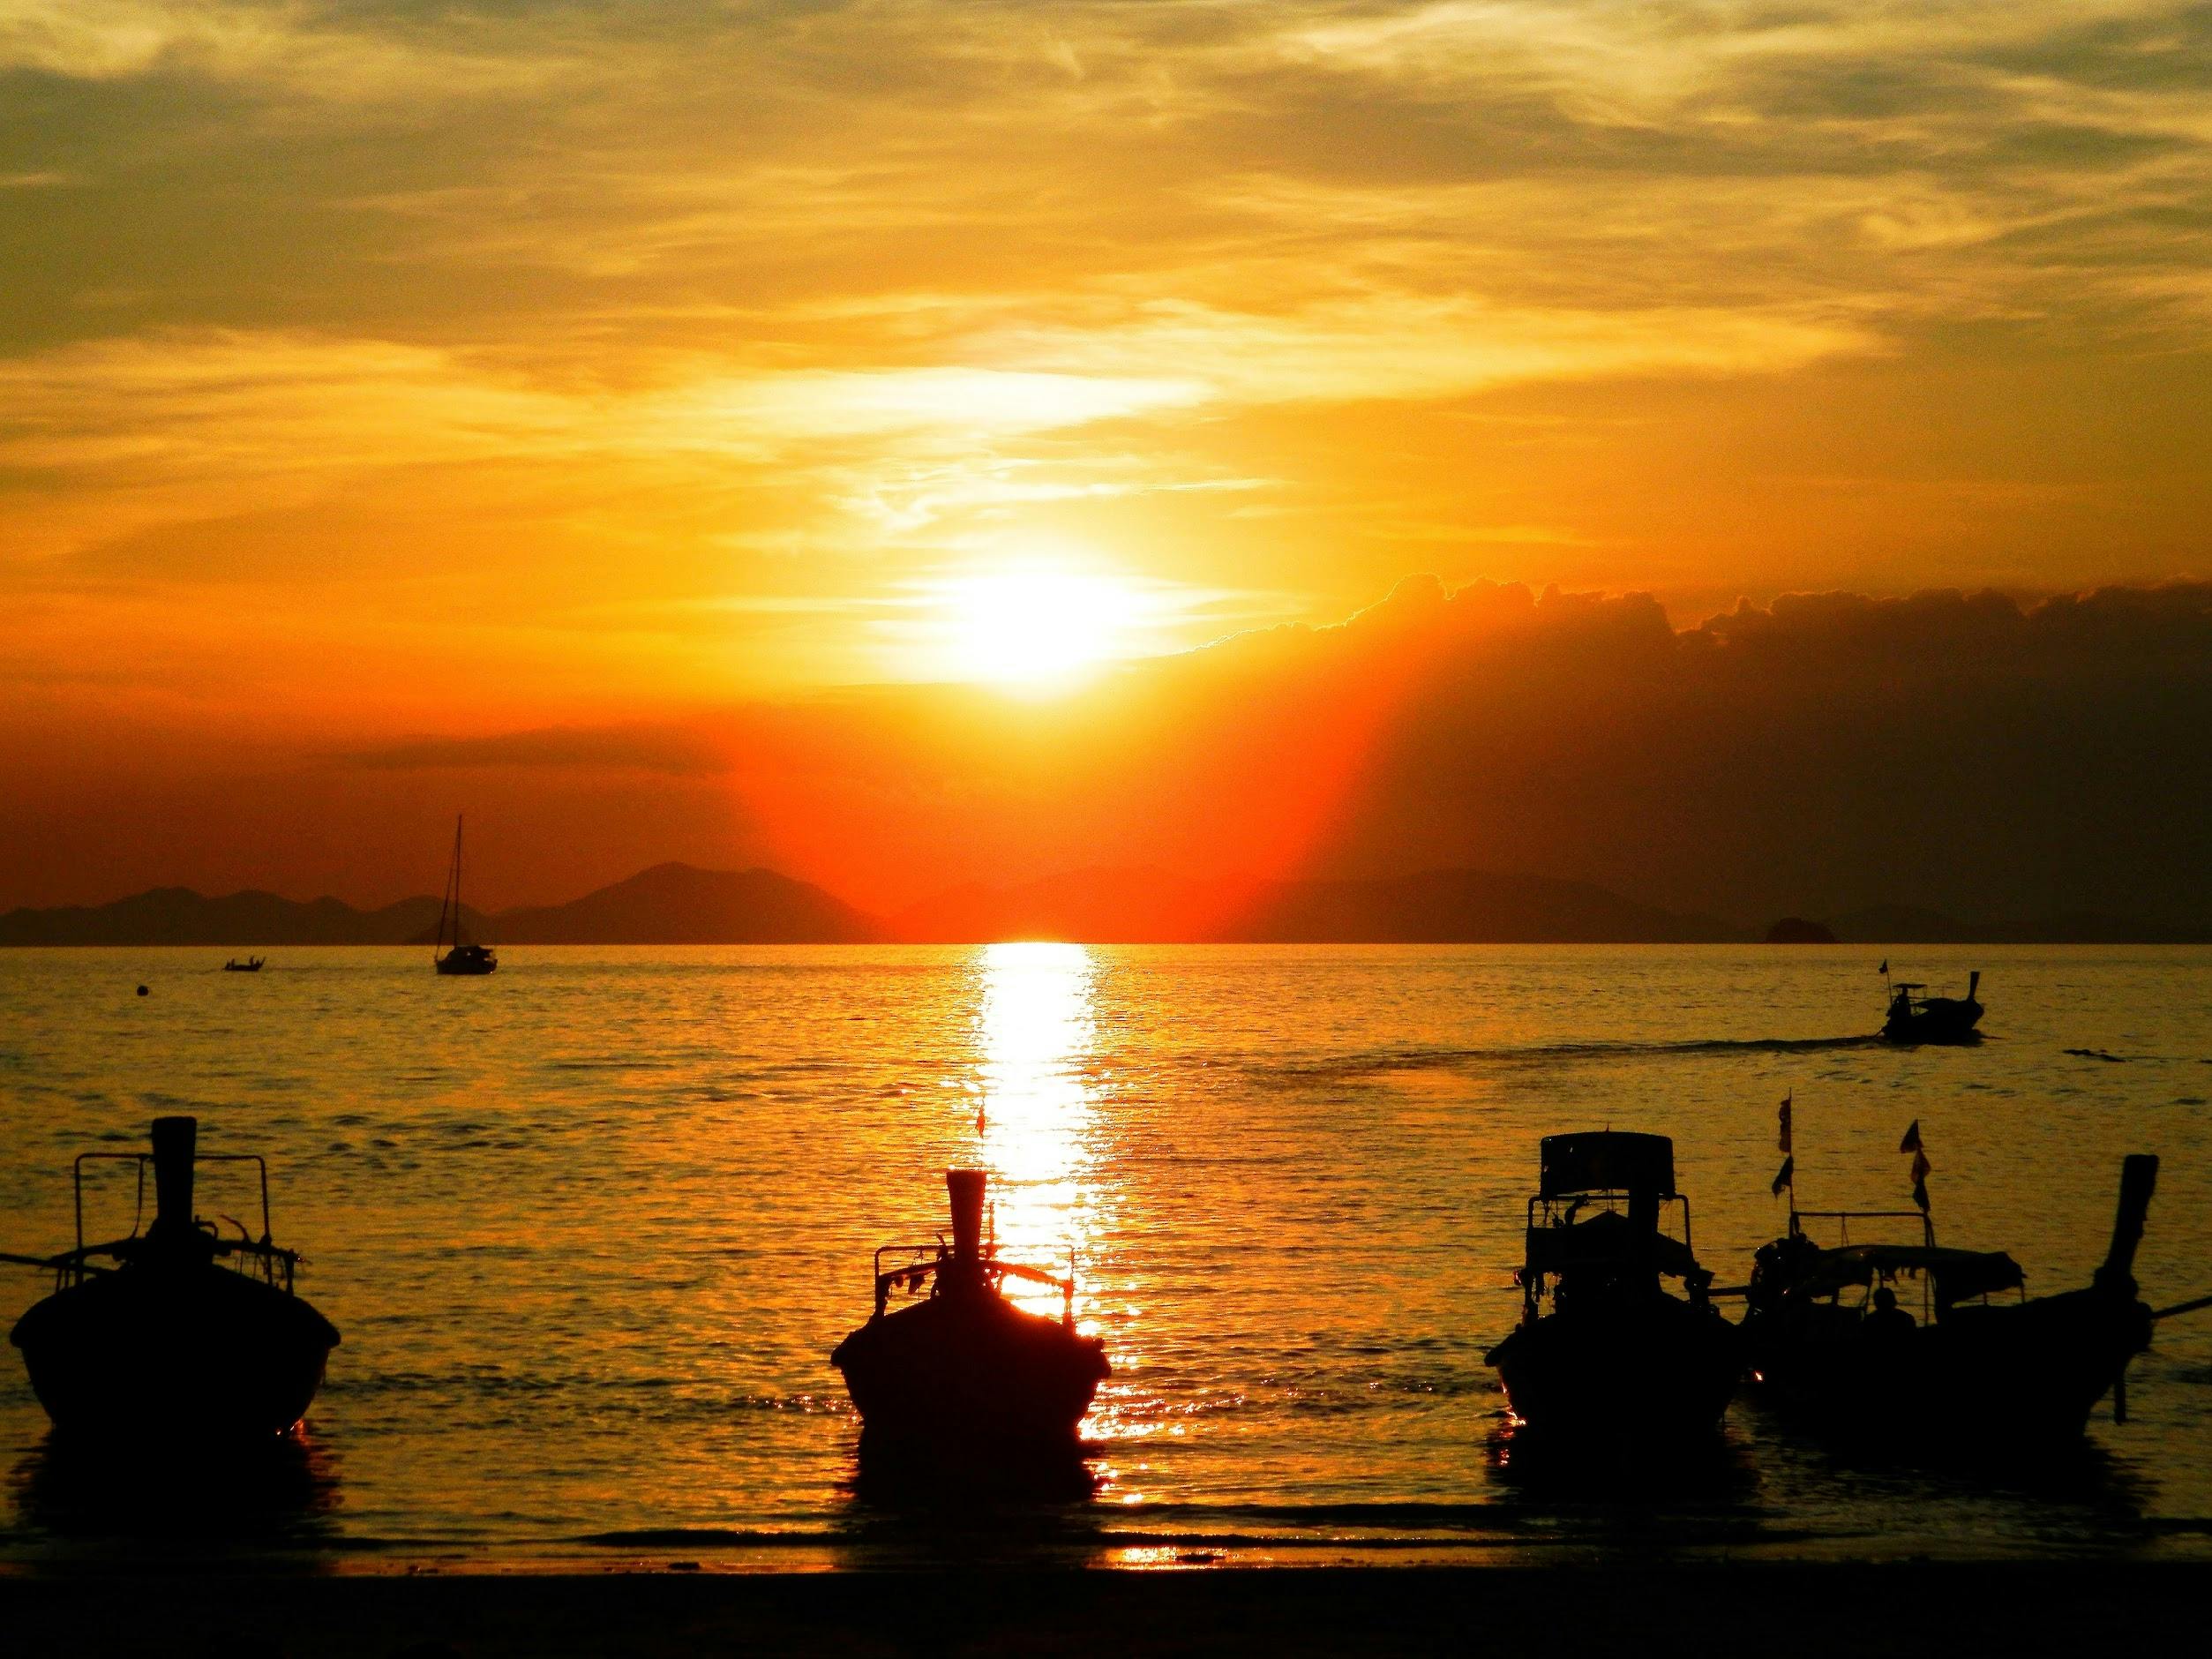 7 Islands sunset tour with dinner & night snorkeling from Krabi